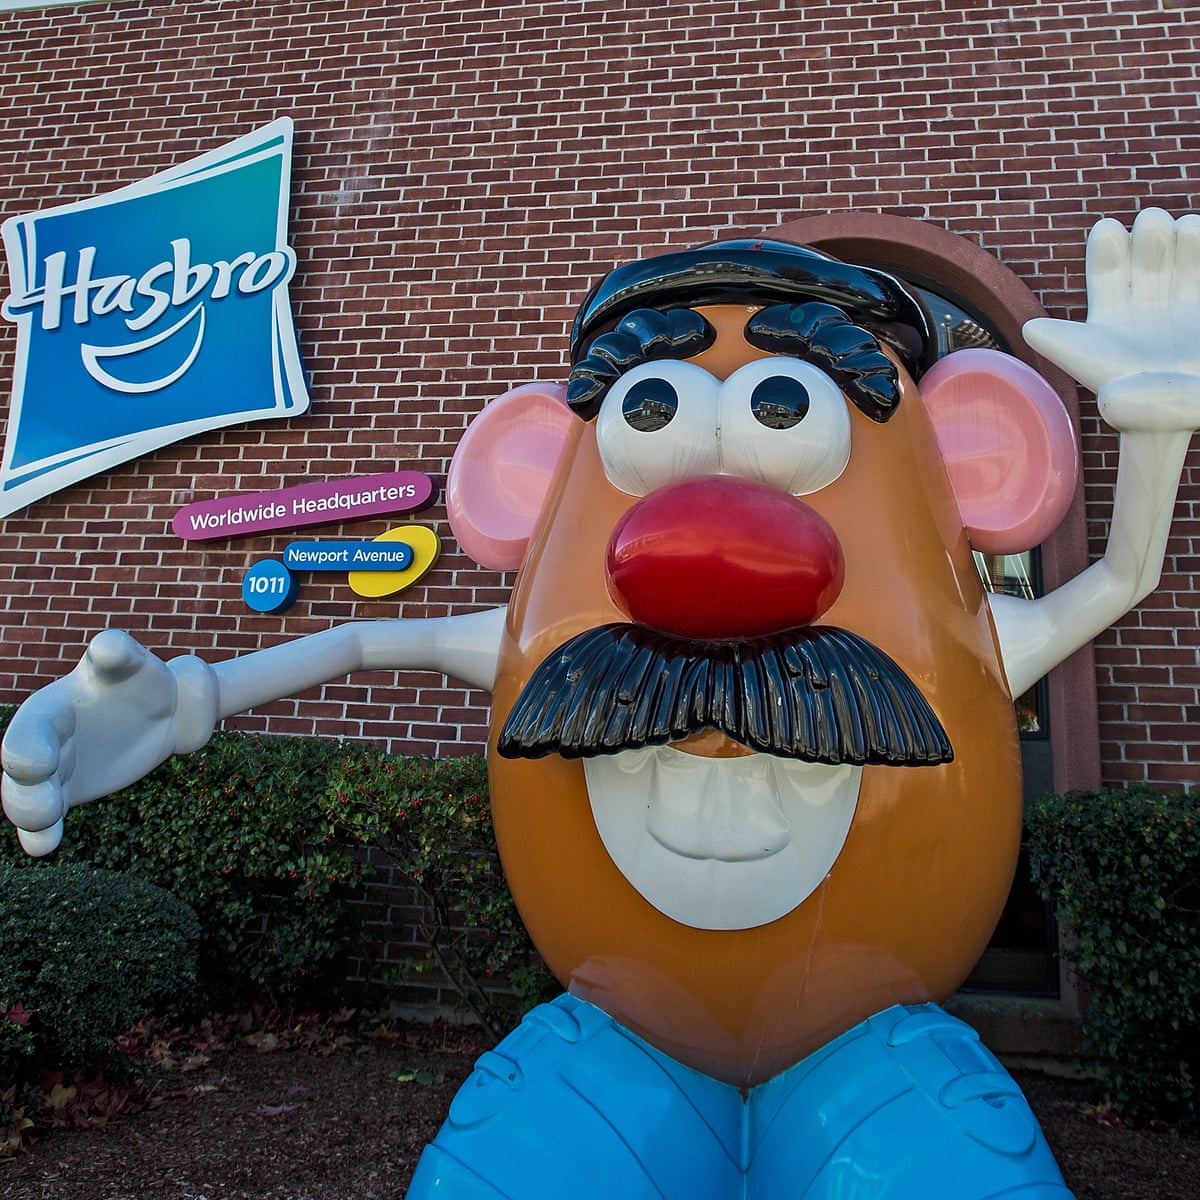 Mr Potato Head loses 'mister' as Hasbro opts for gender-neutral